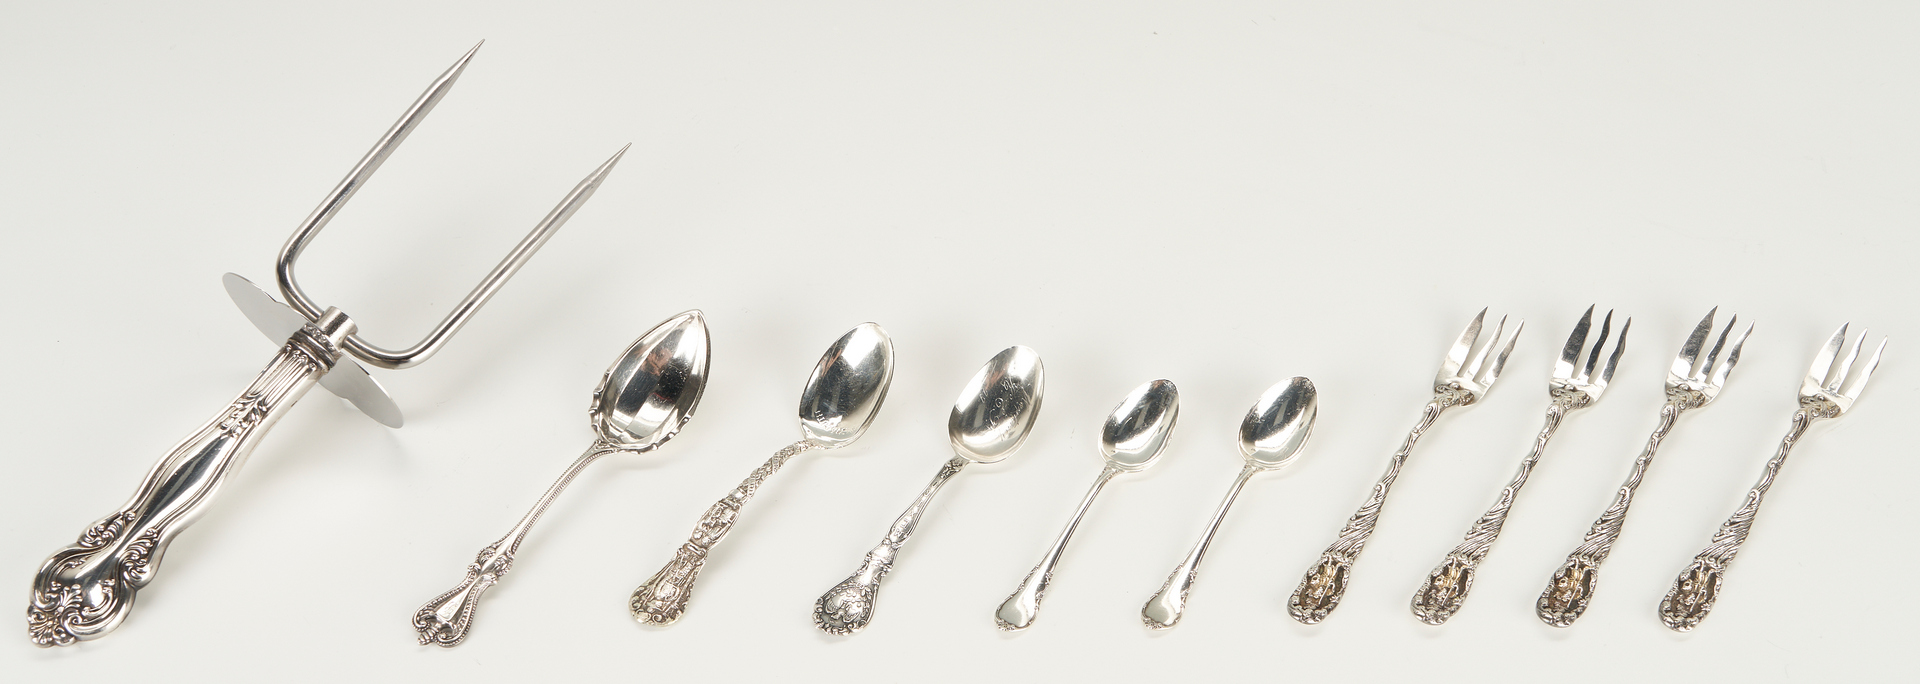 Lot 1249: 15 pcs sterling silver incl. candy bowls, flatware